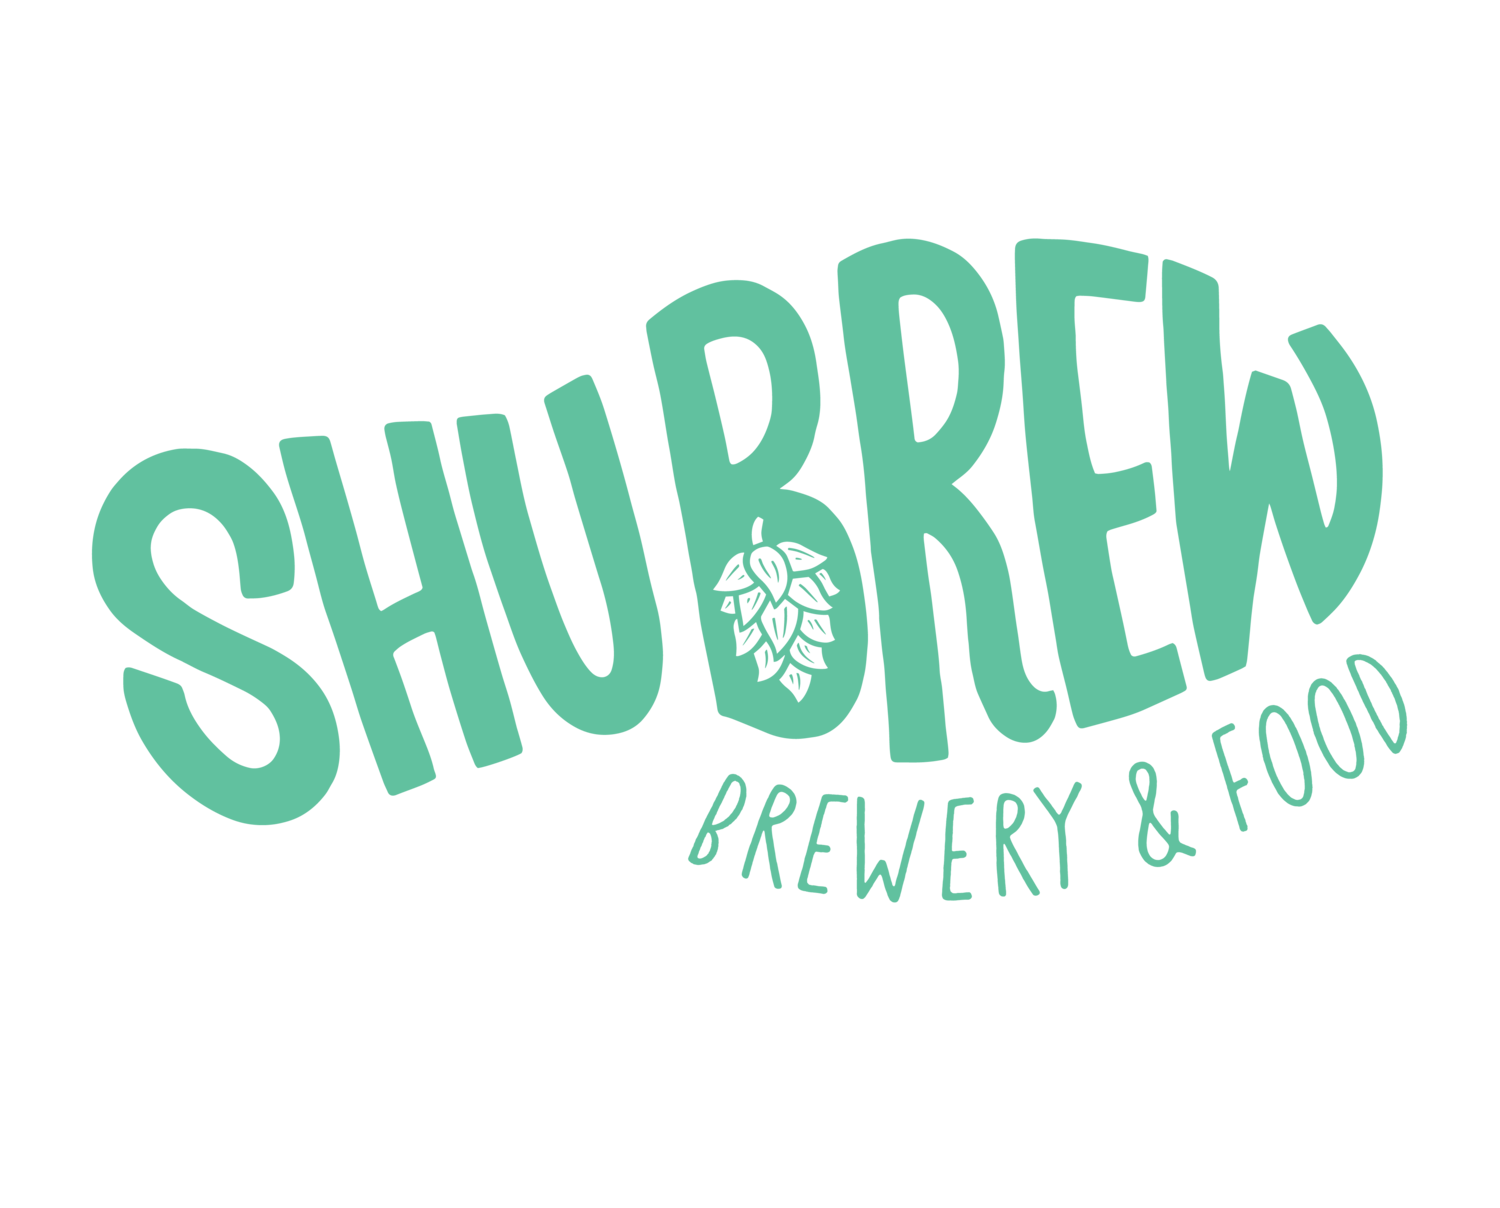 ShuBrew Brewery and Food 